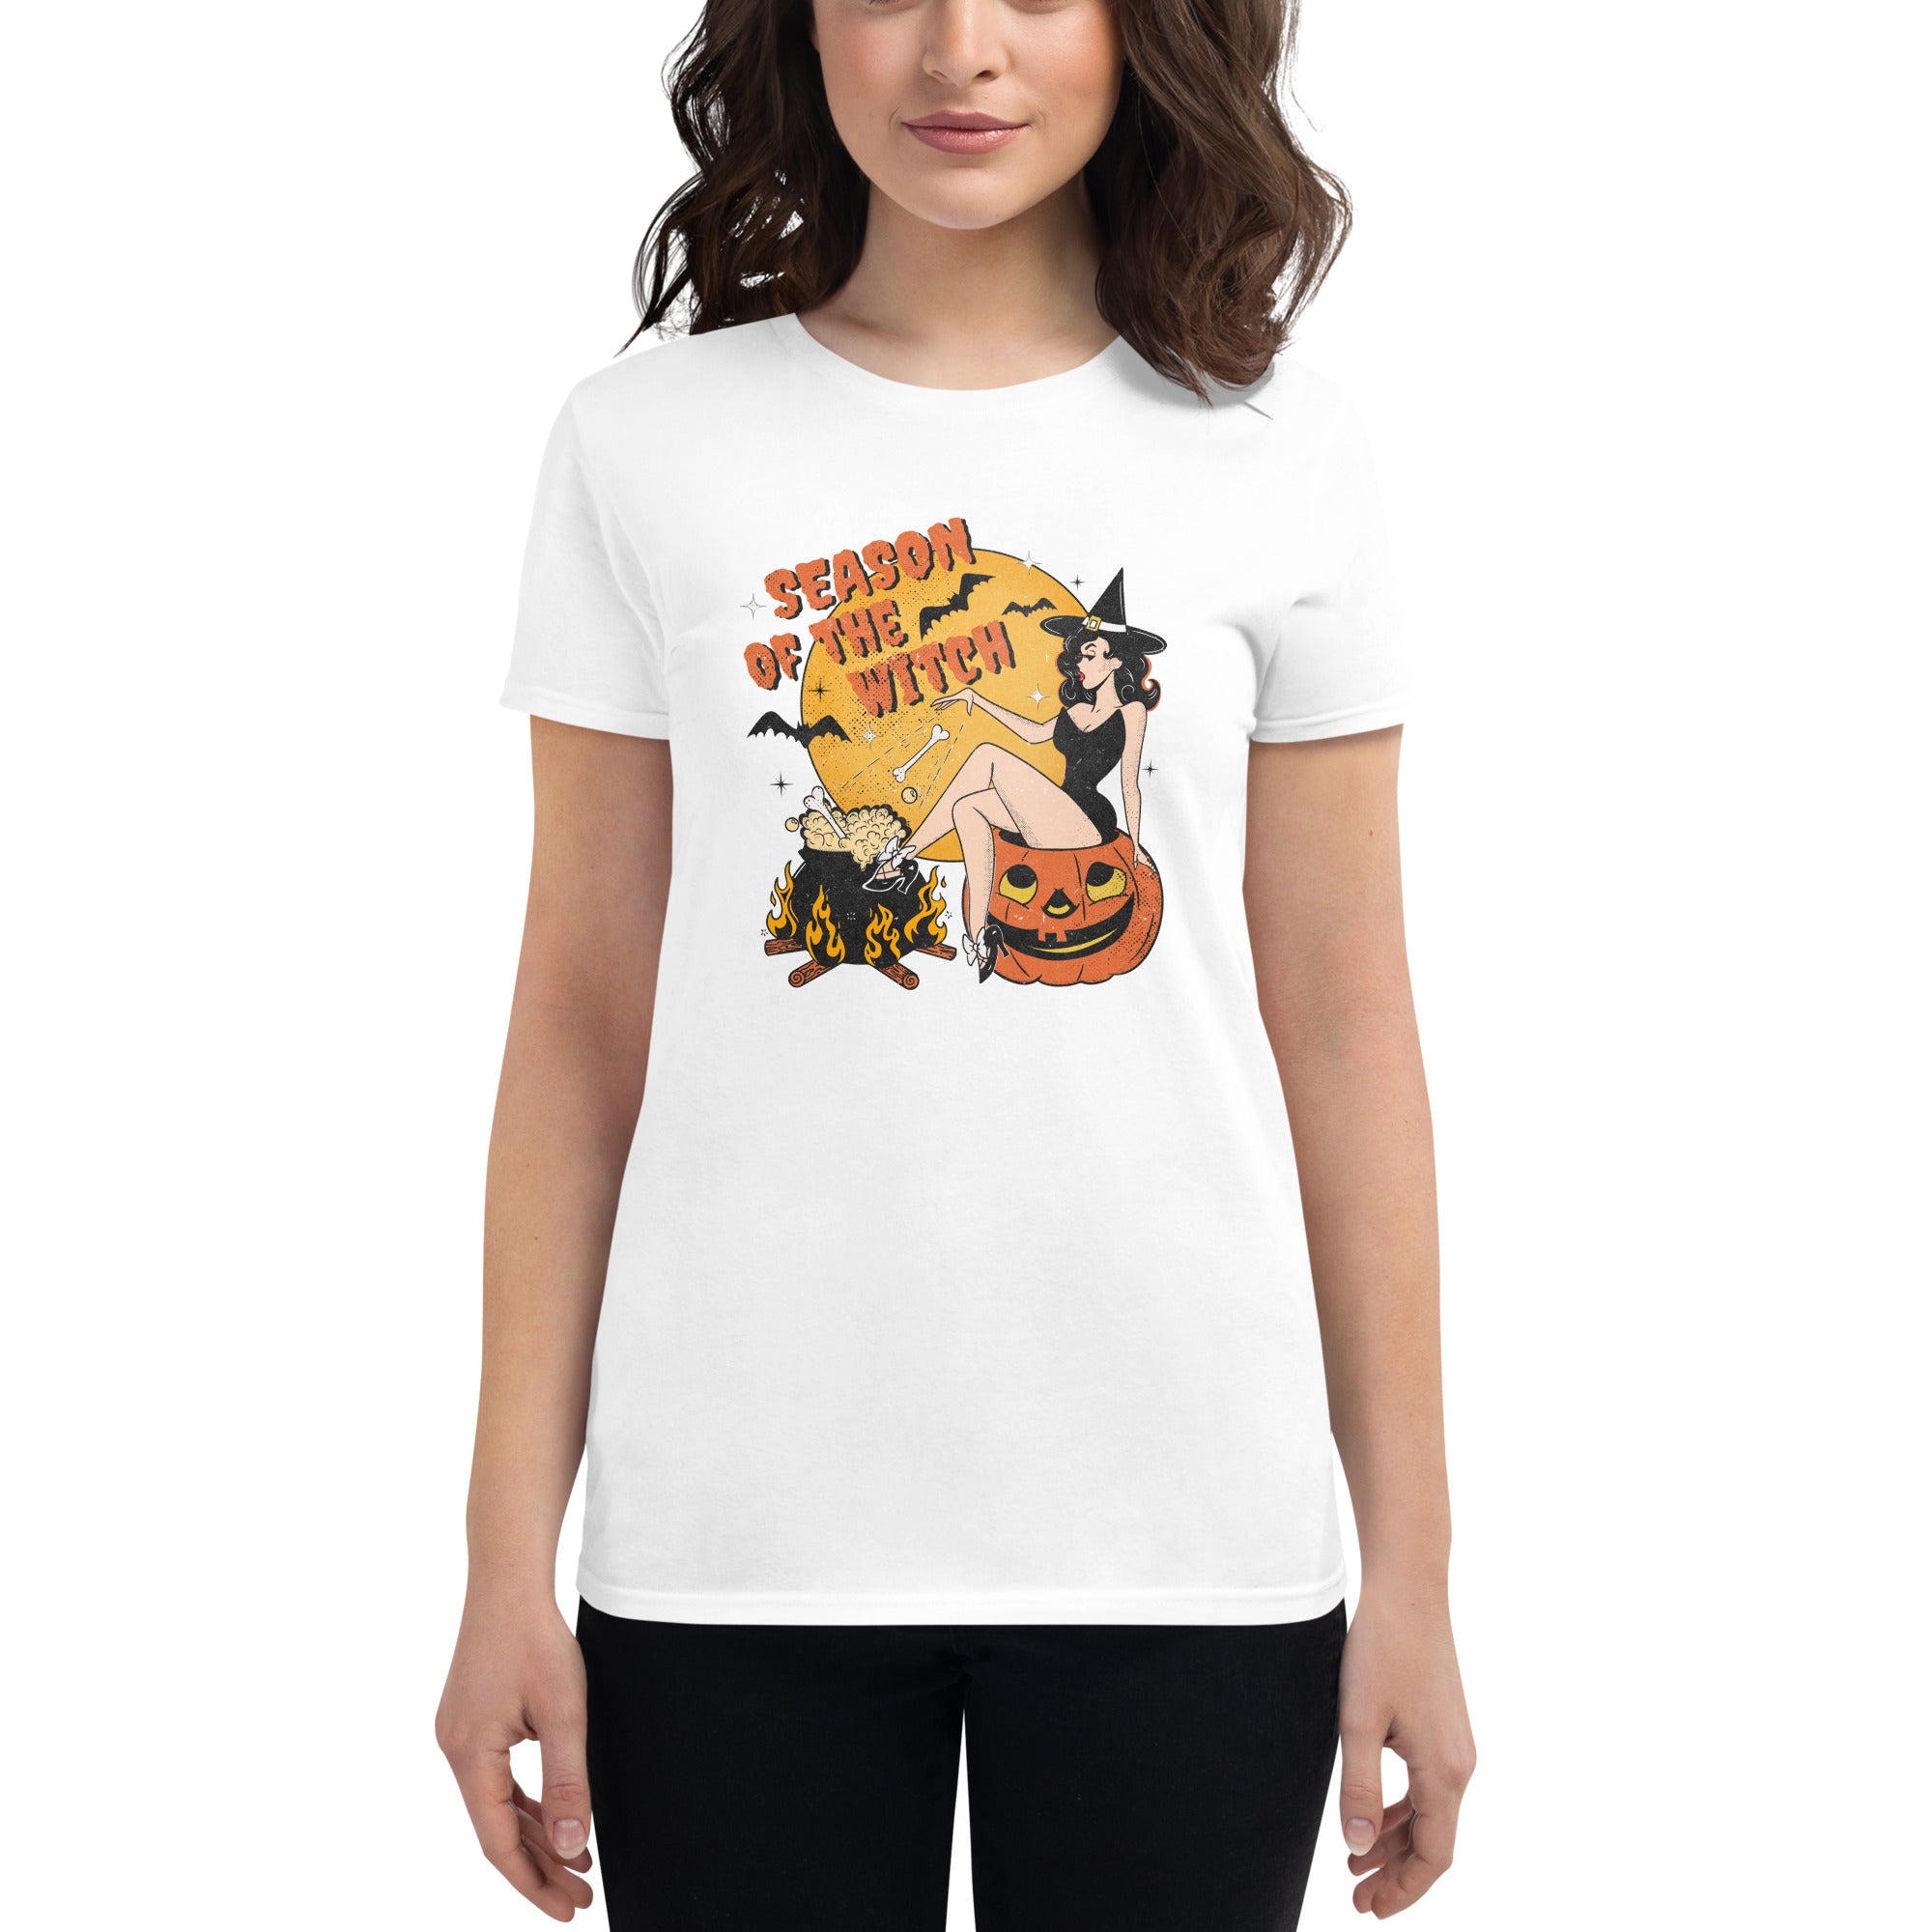 Season of the Witch Halloween T Shirt for Women